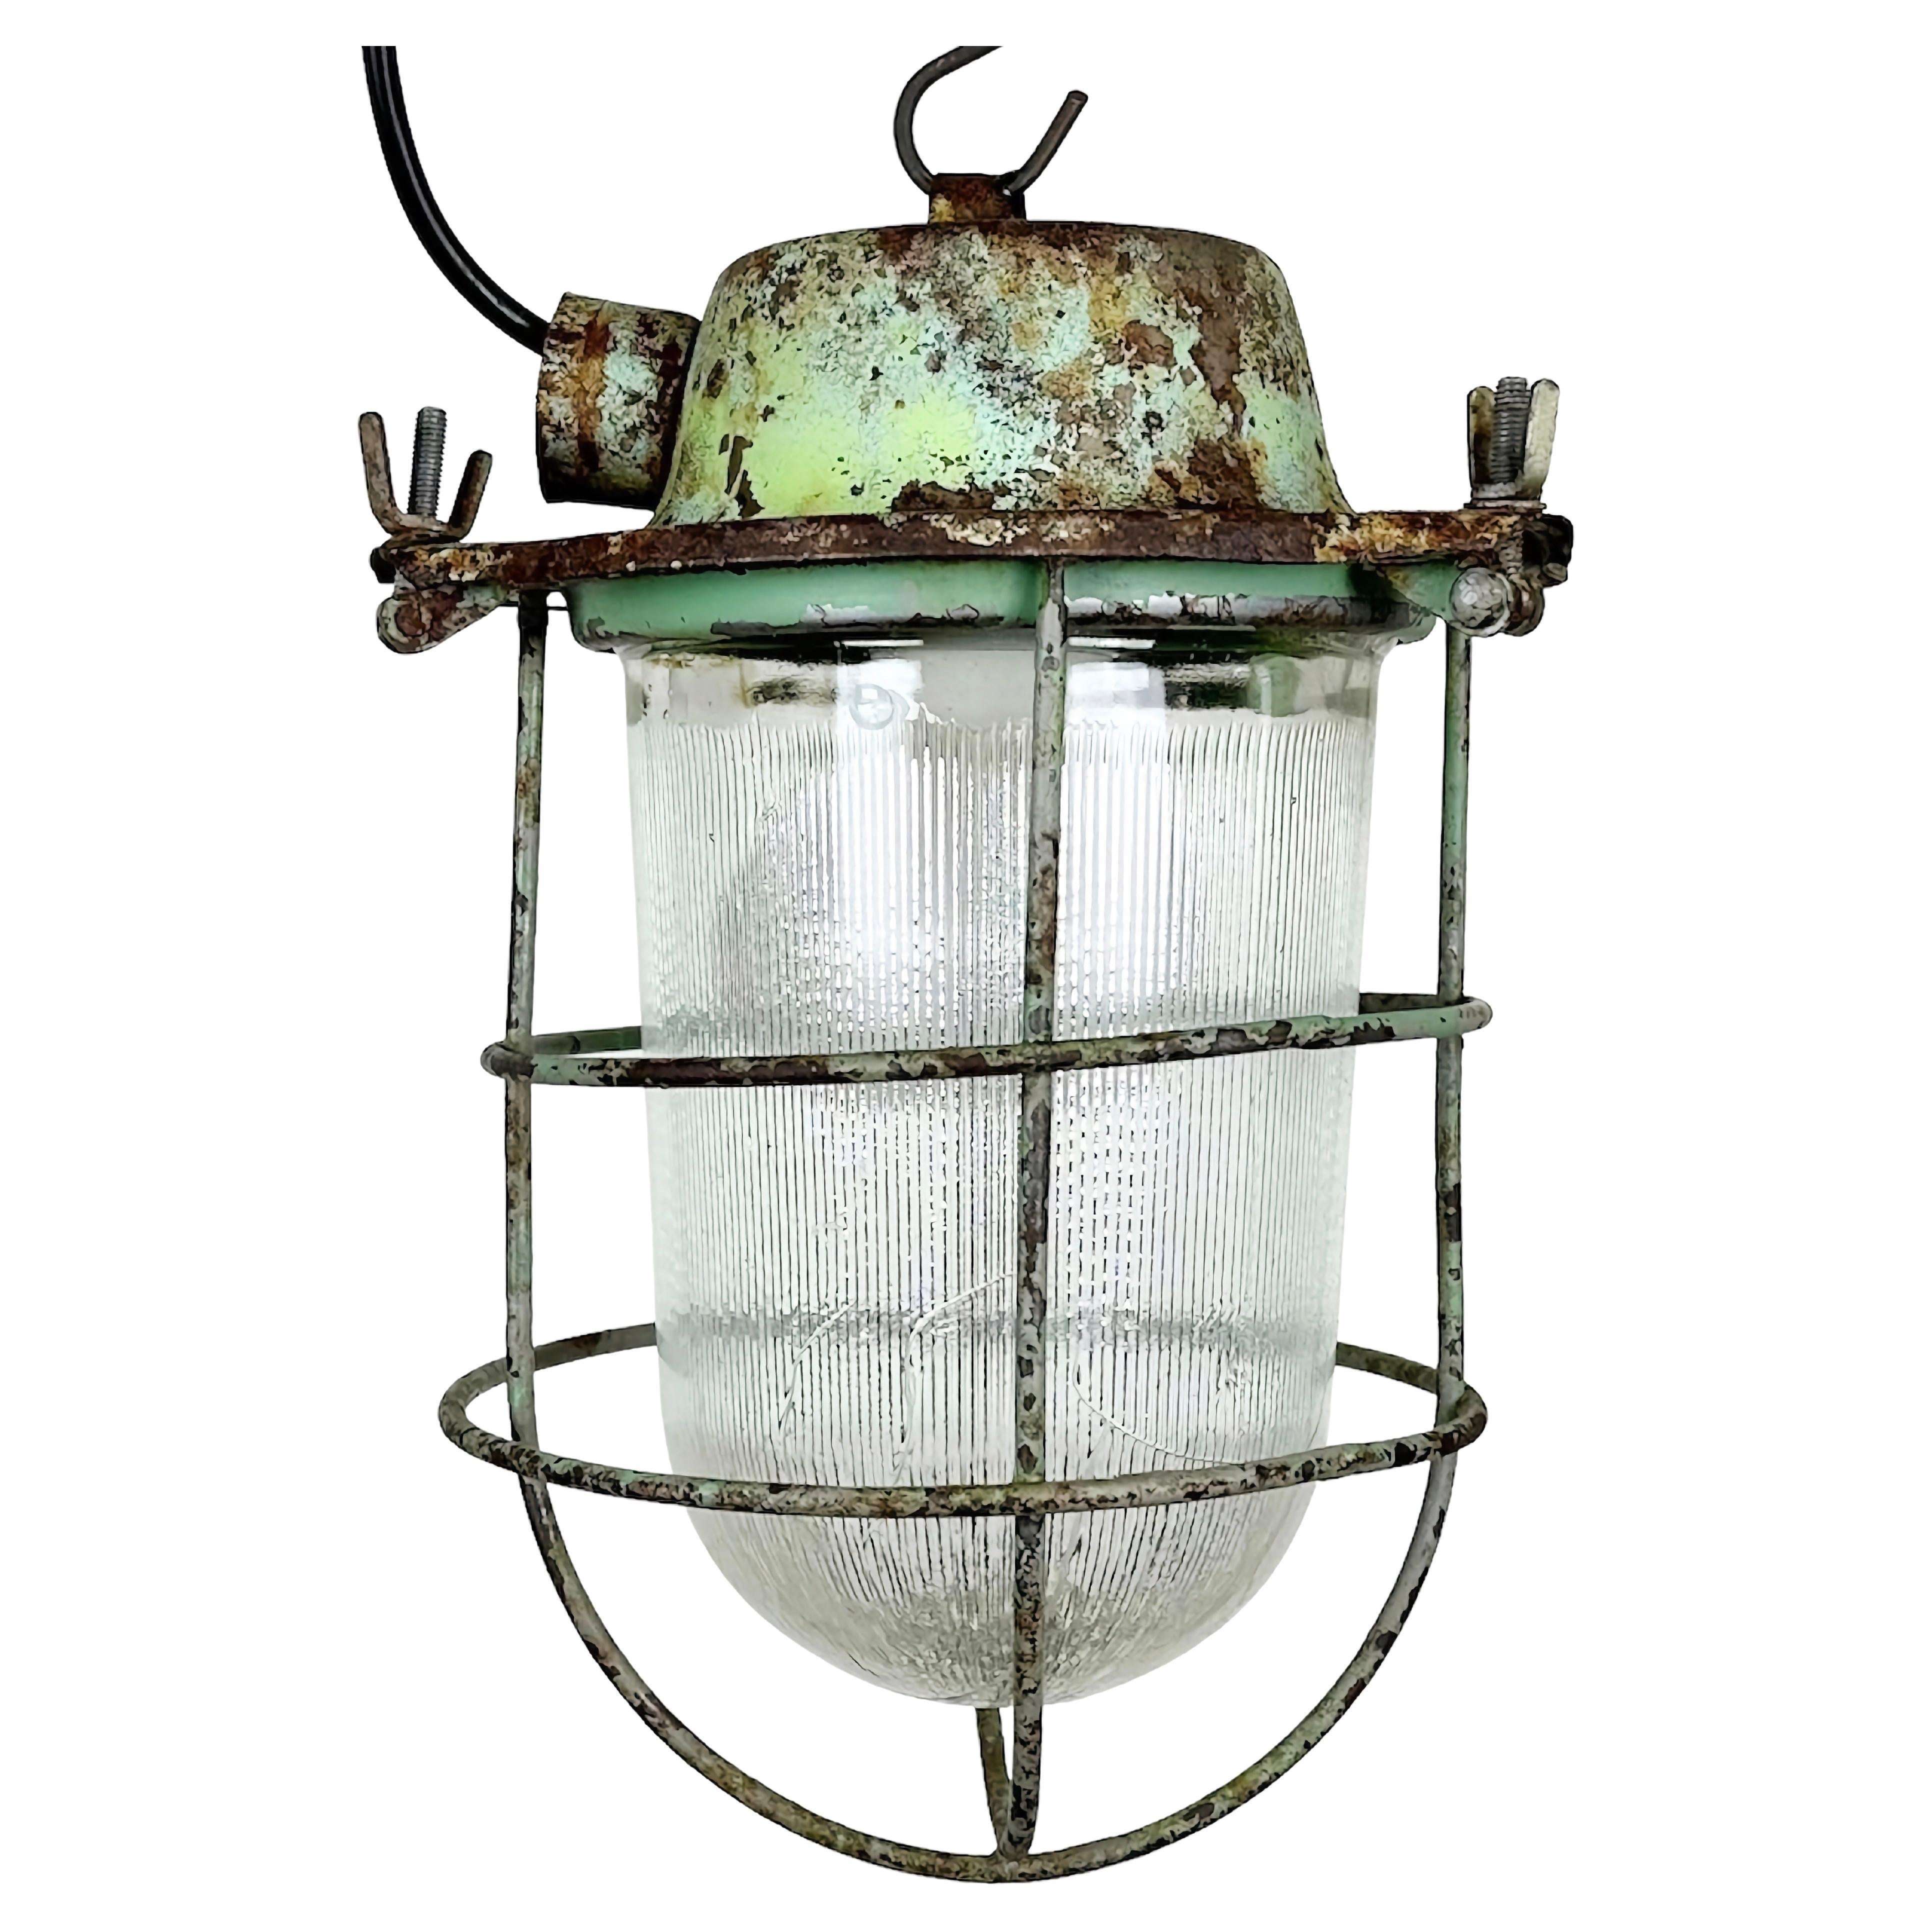 Green Industrial Soviet Bunker Pendant Light with Iron Grid, 1960s For Sale